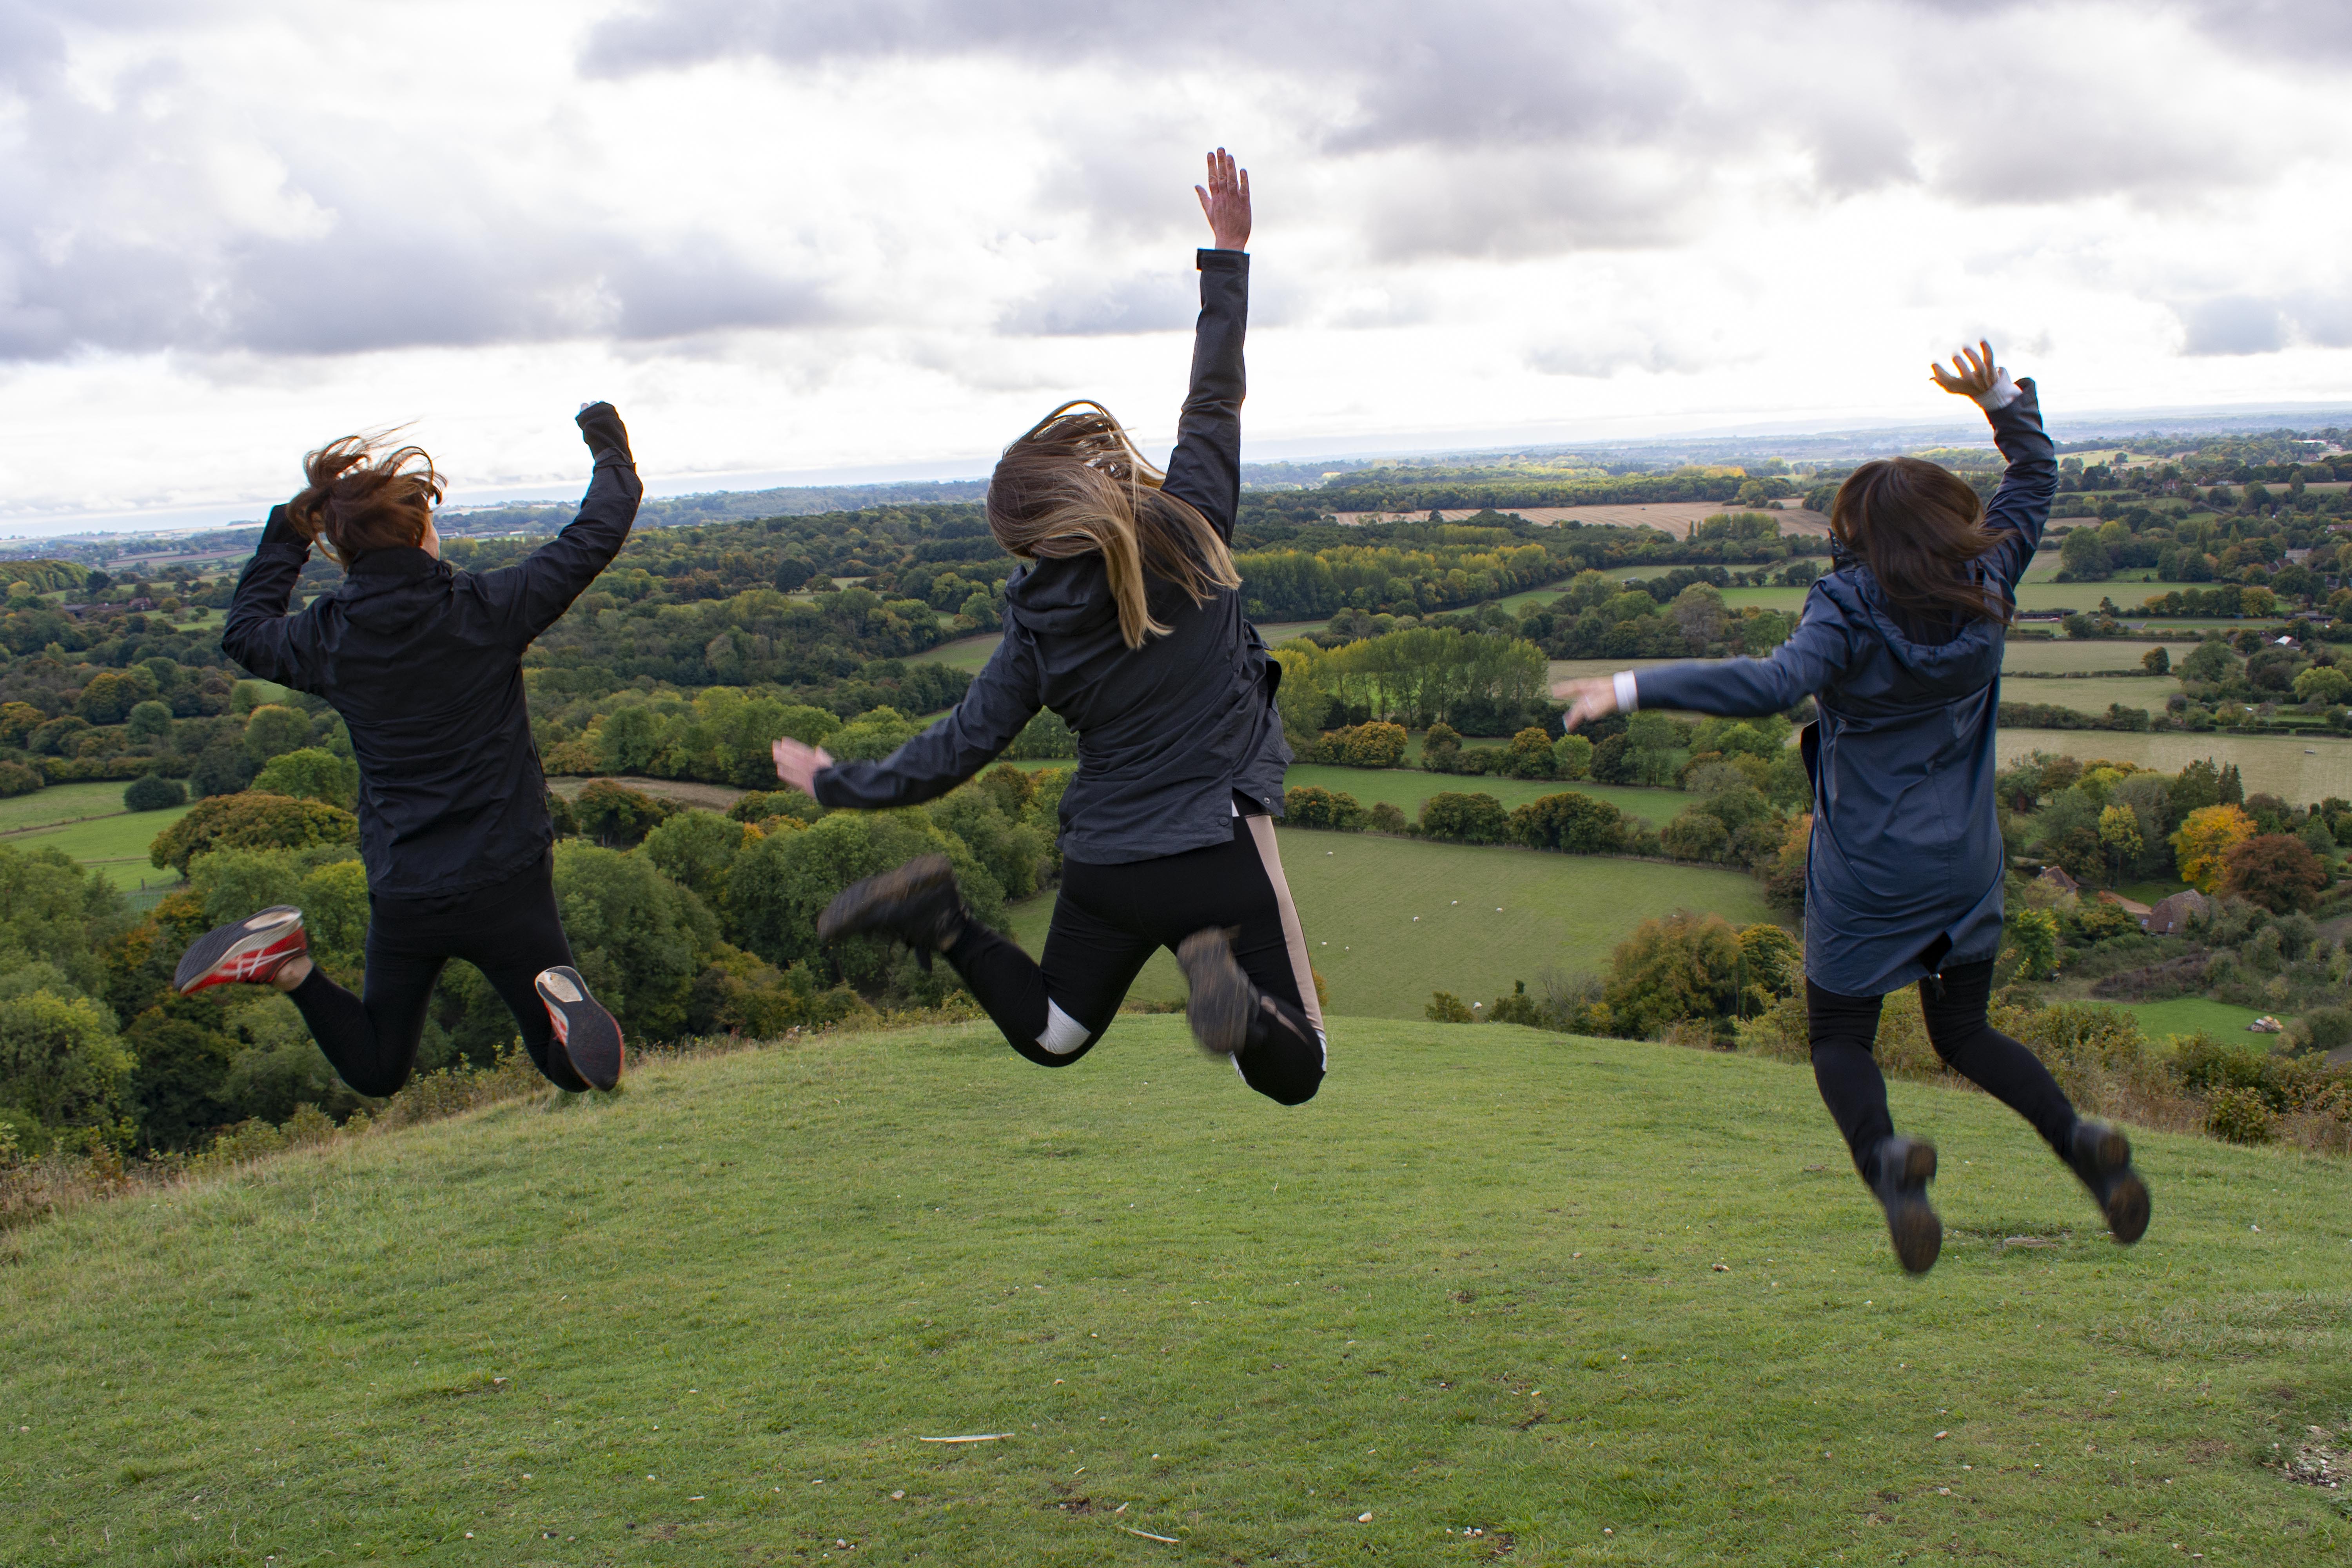 Three people jumping in the air, backs facing the camera as they smile, withA person looking out across rolling fields and scenery in the background.